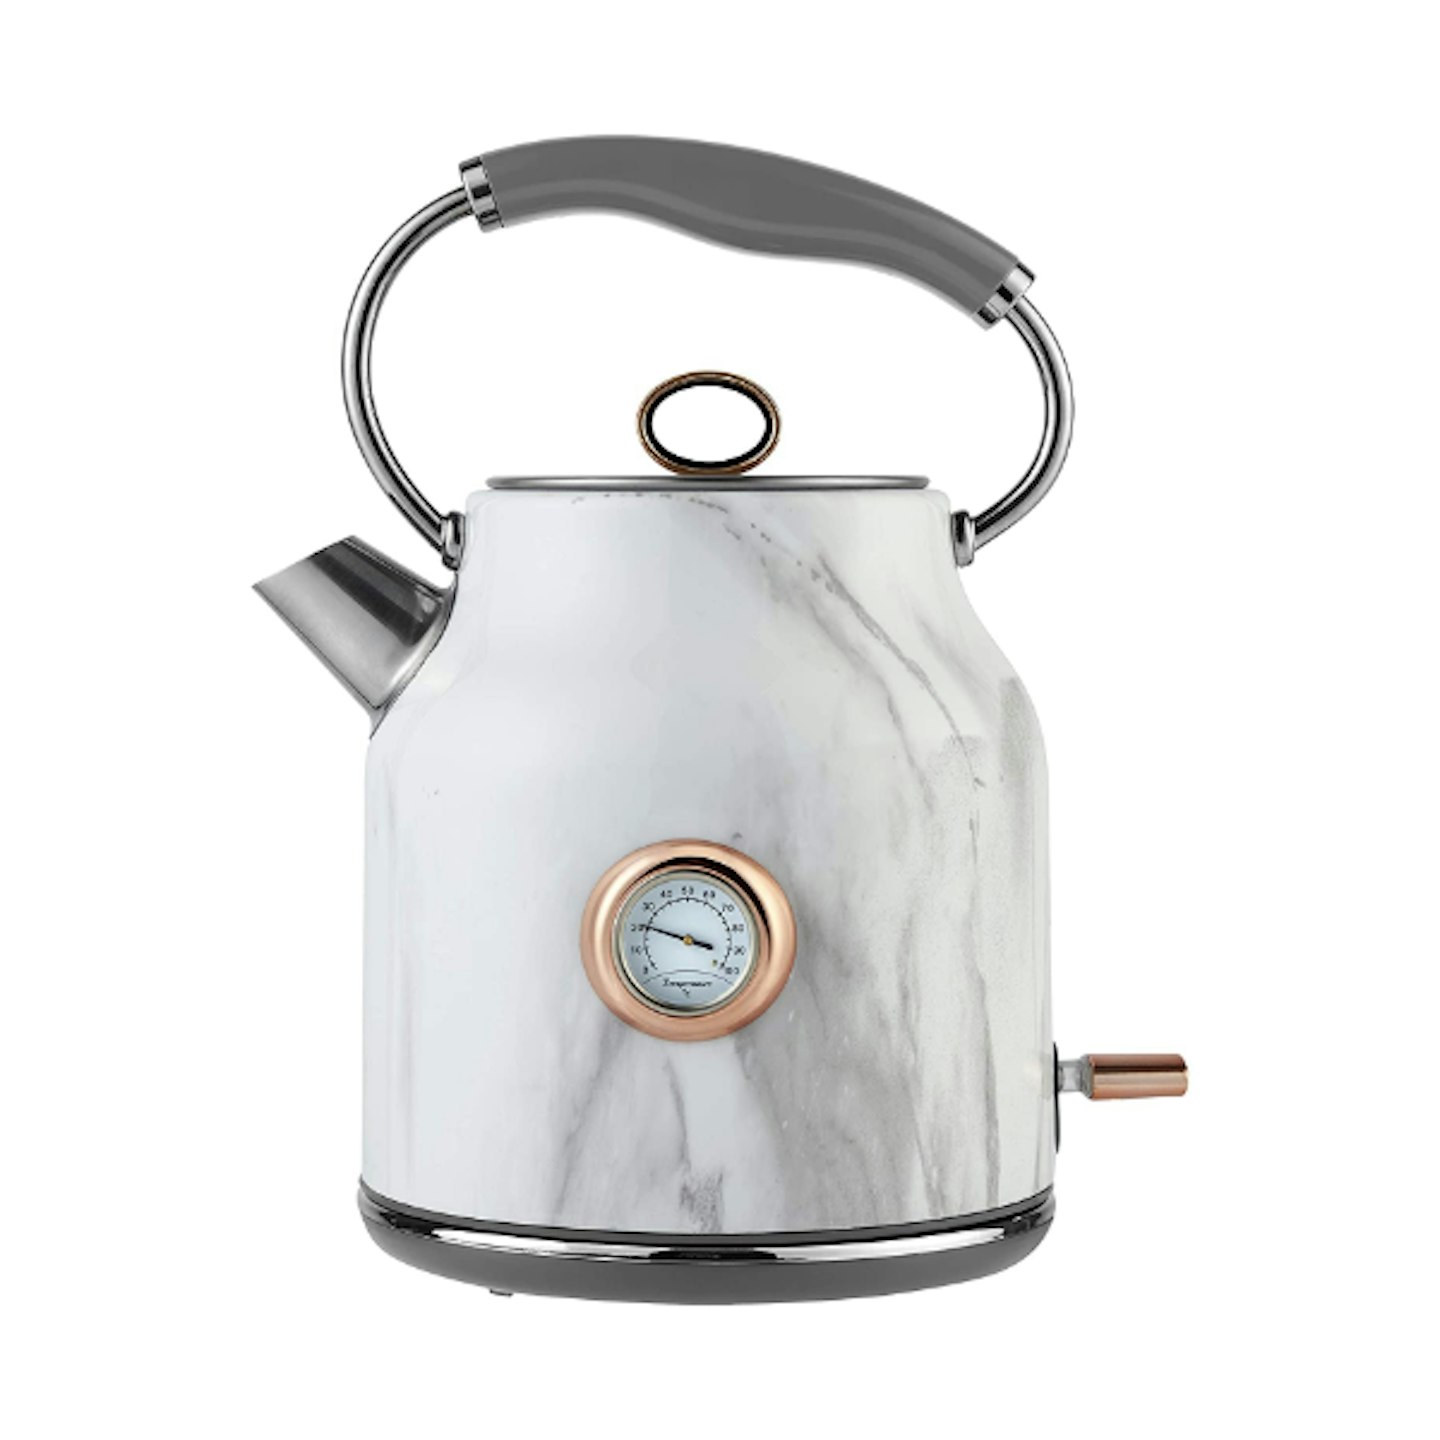 Tower Bottega Rapid Boil Kettle with Temperature Dial